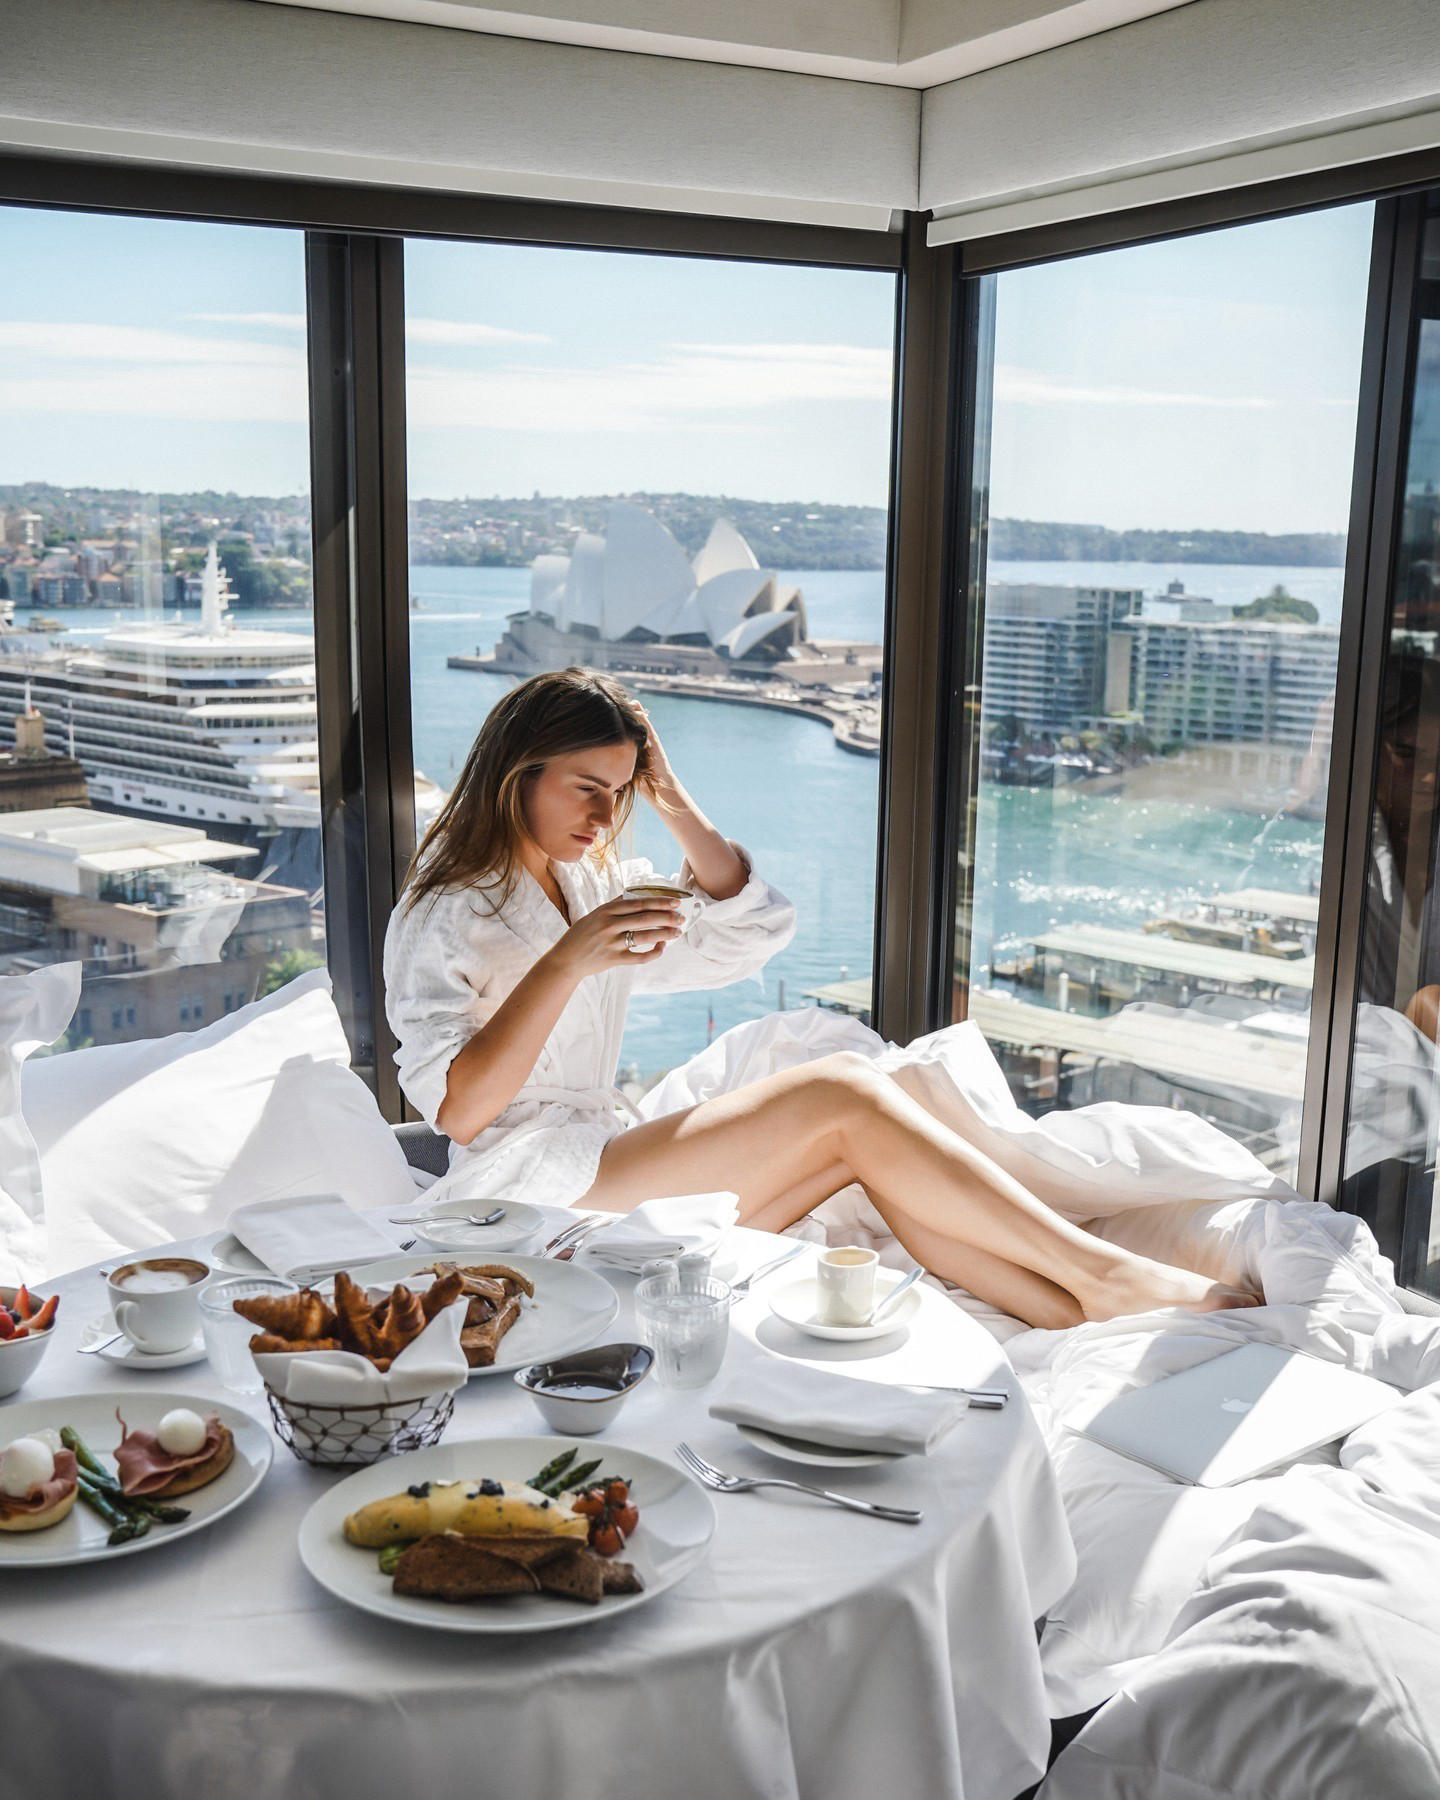 Four Seasons Hotel Sydney - Nothing feels better than waking up to an array of breakfasts in bed ove